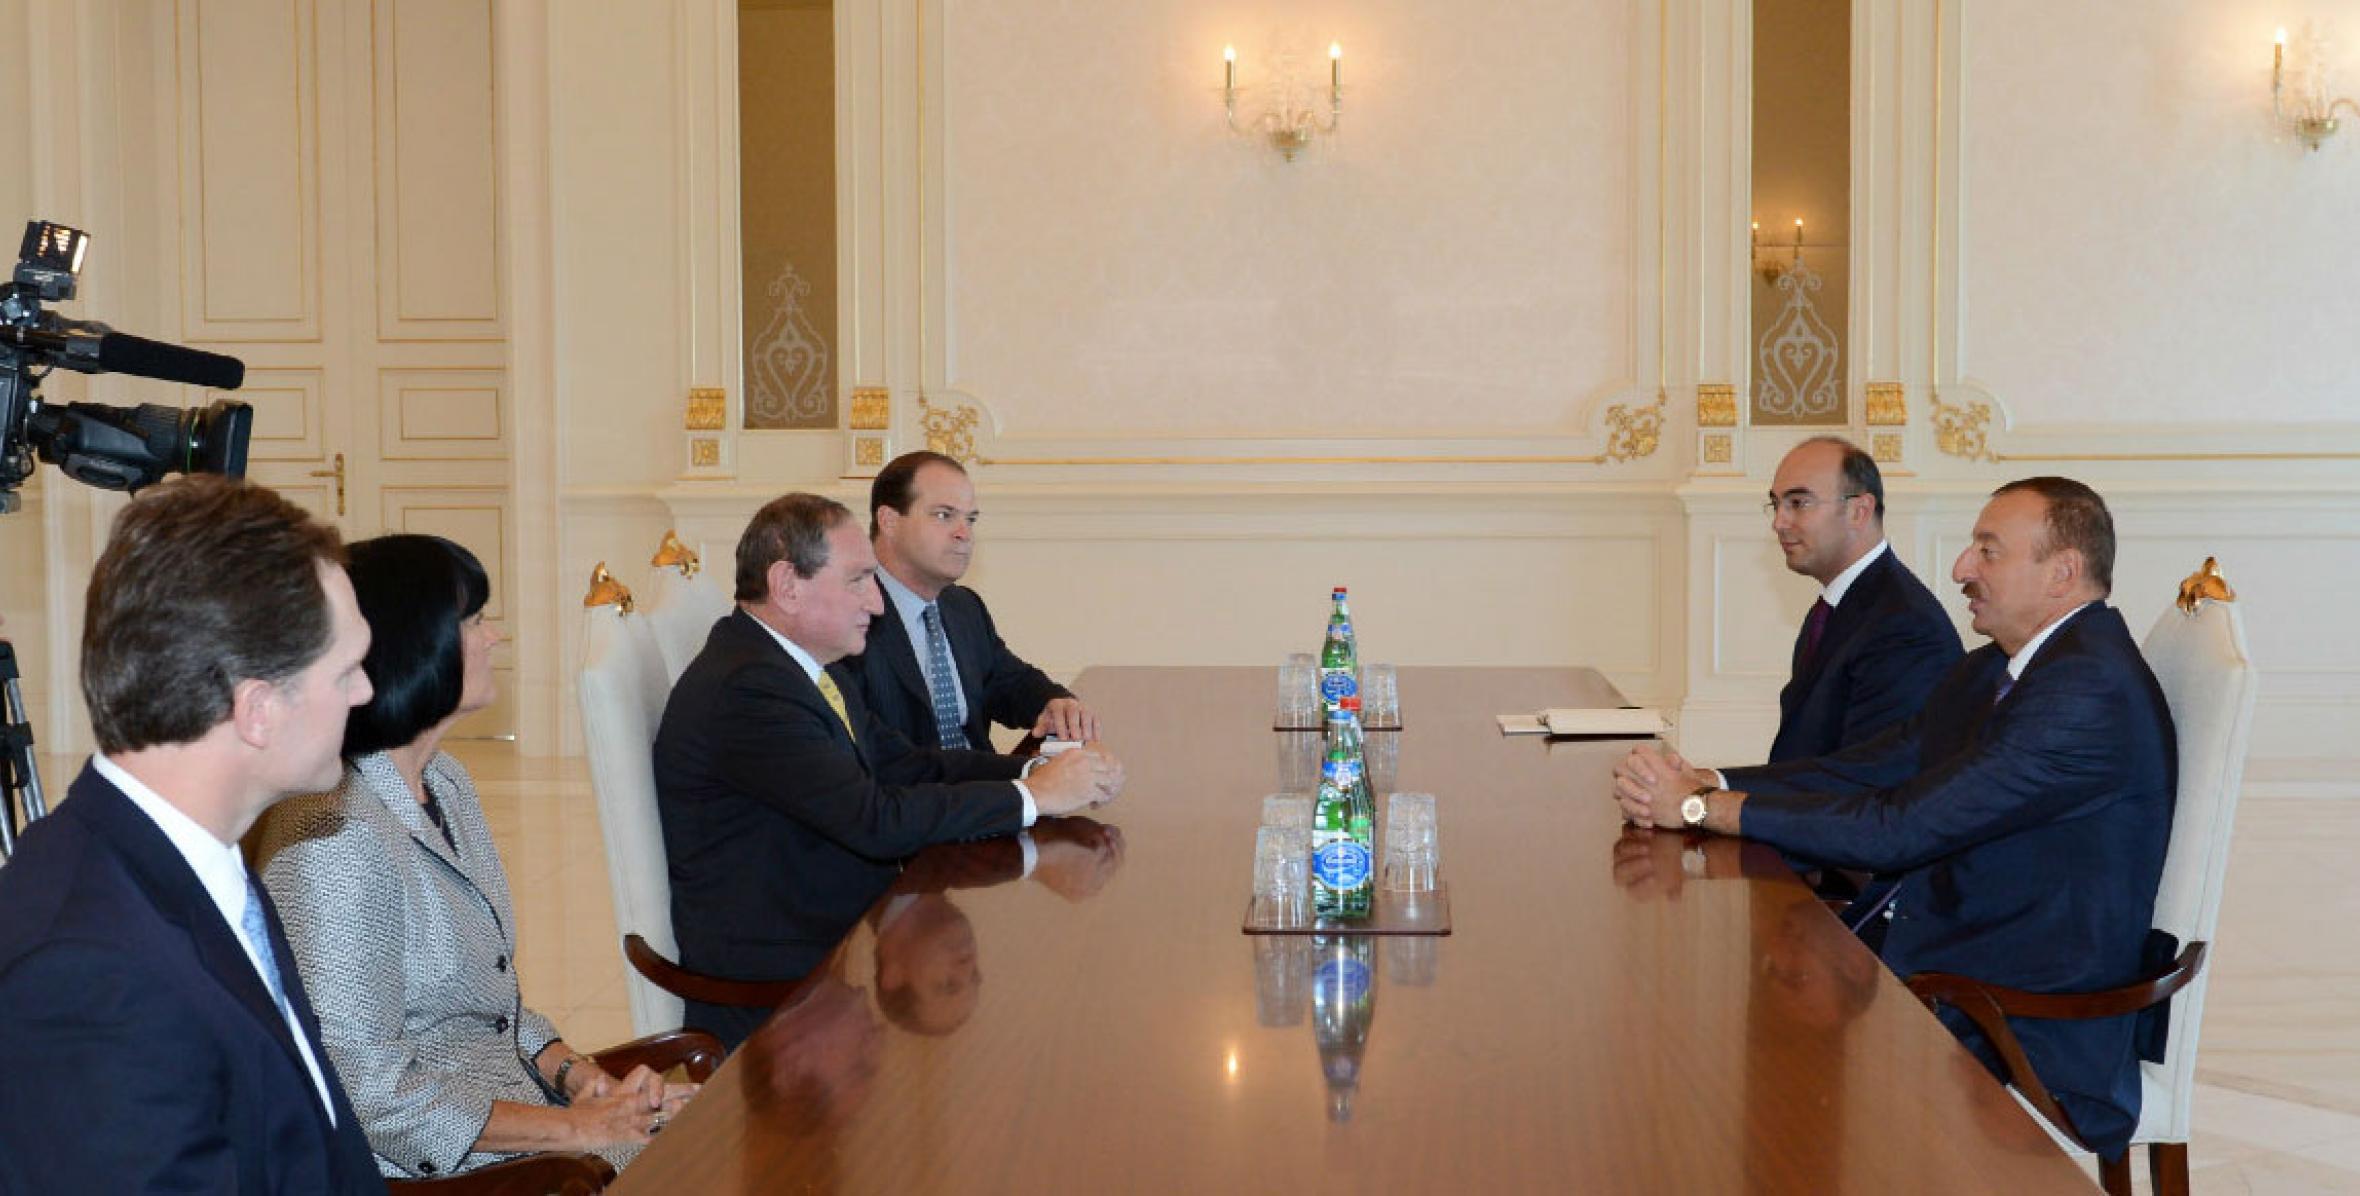 Ilham Aliyev received the delegation led by the founder and chief executive officer of the “Stratfor” analytical center